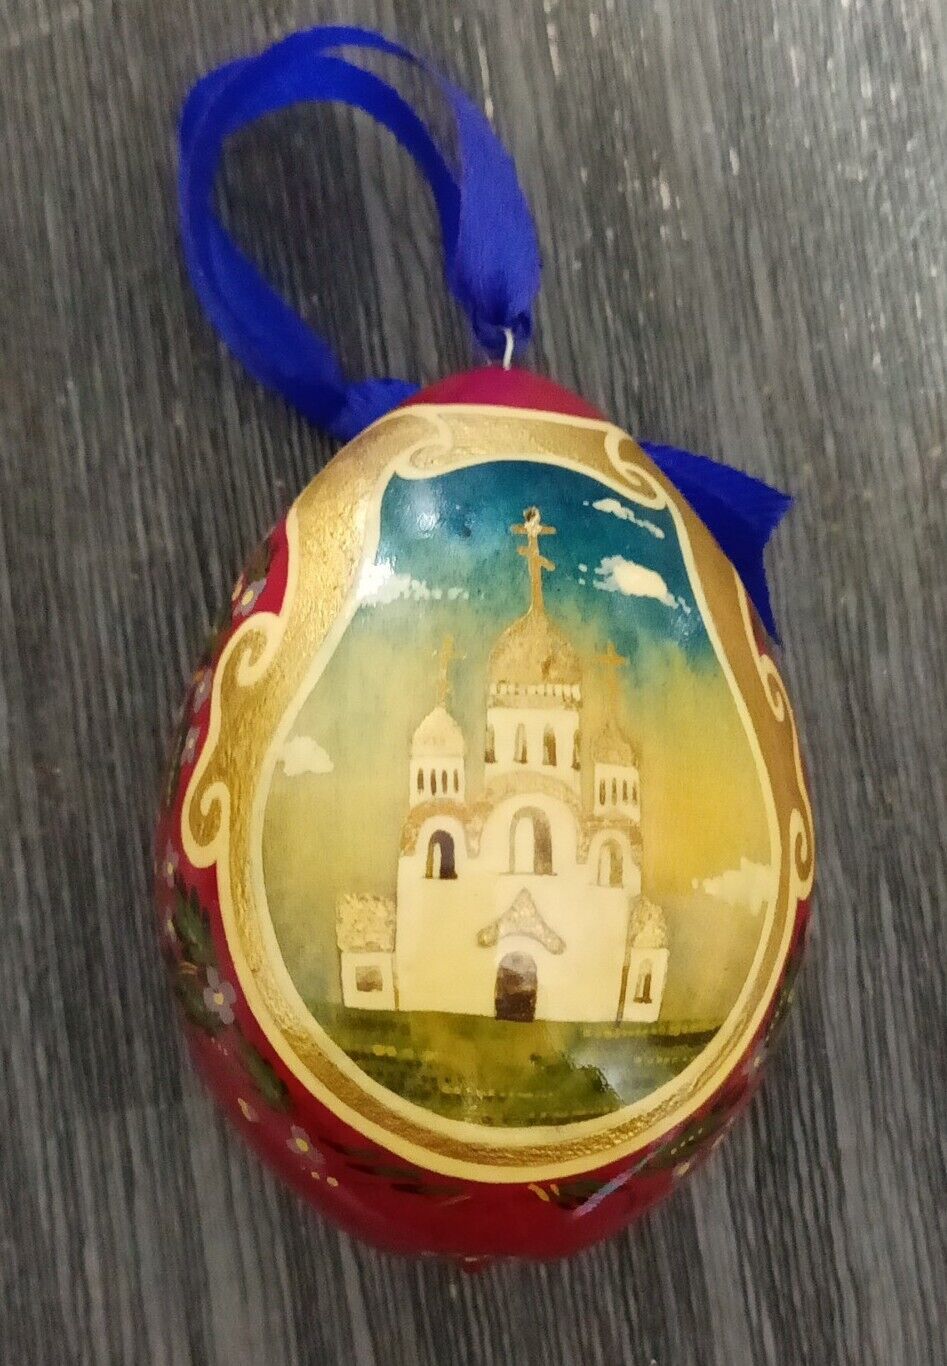 Russian Laquered Hand Painted Egg Ornament 1995 Vintage 